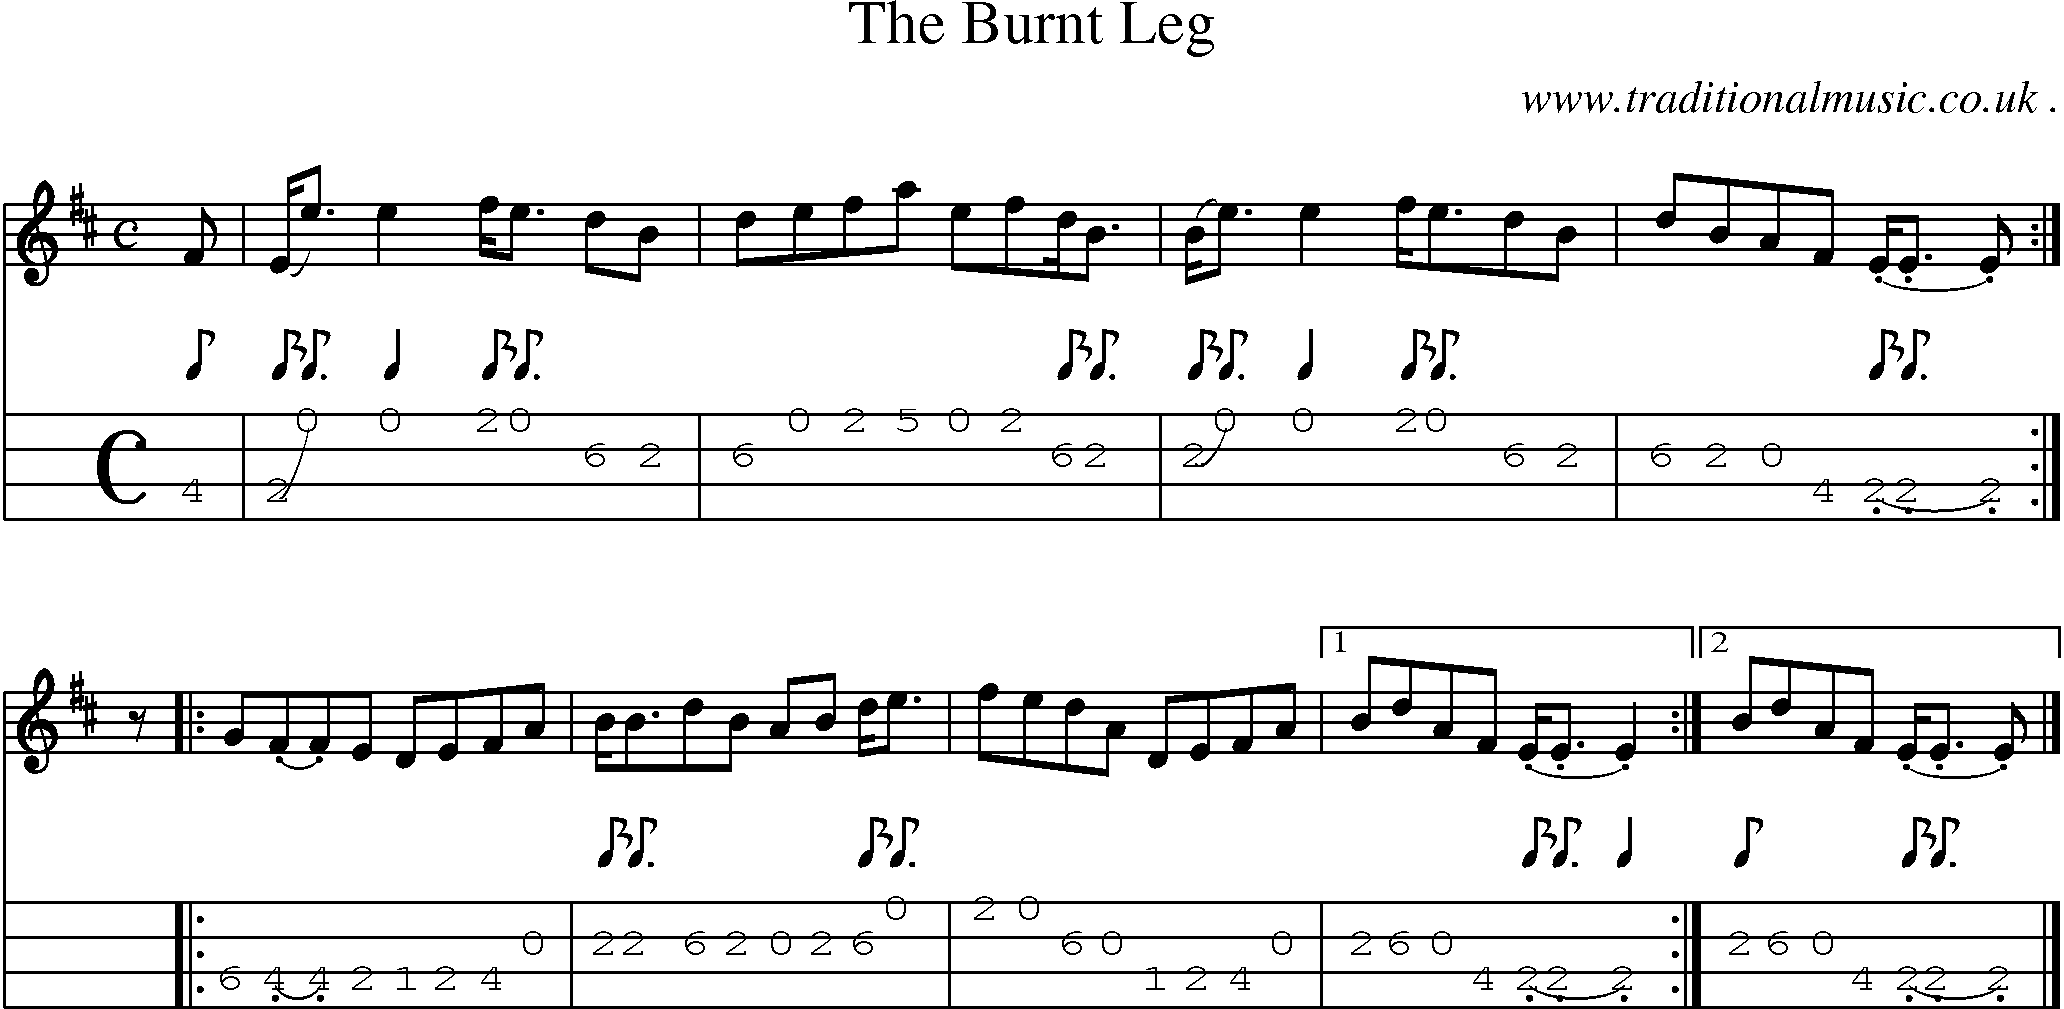 Sheet-music  score, Chords and Mandolin Tabs for The Burnt Leg